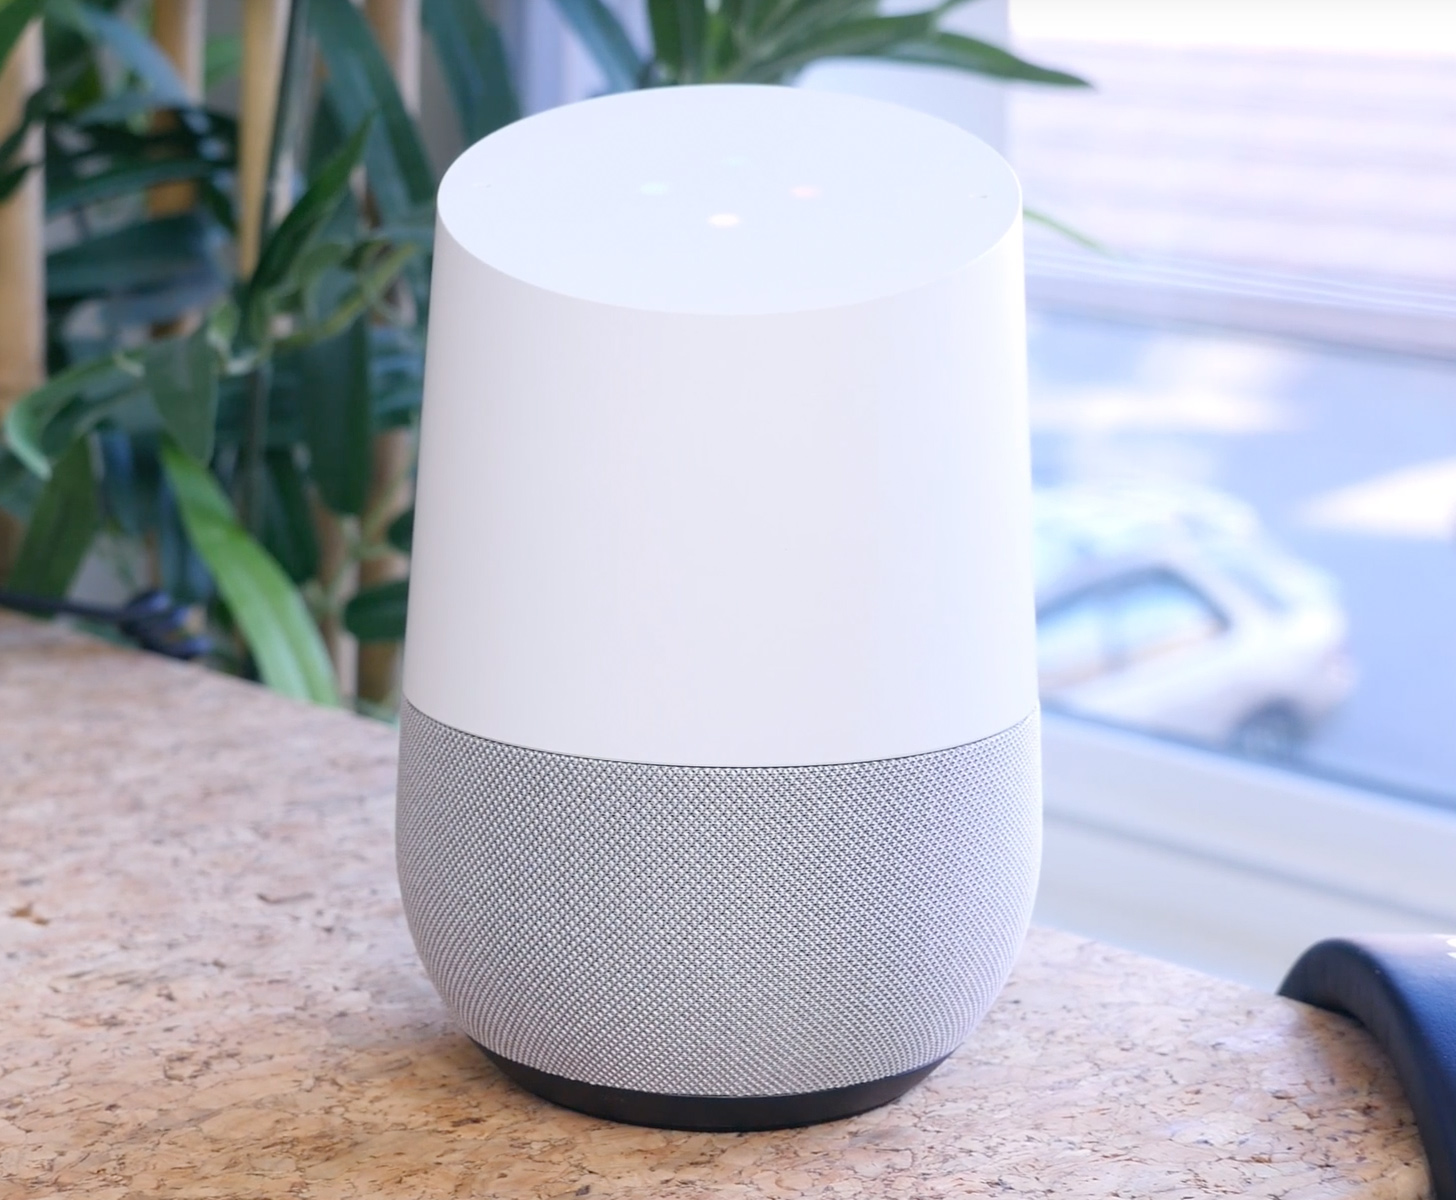 You can now broadcast to all Google Home devices in your house | PhoneDog